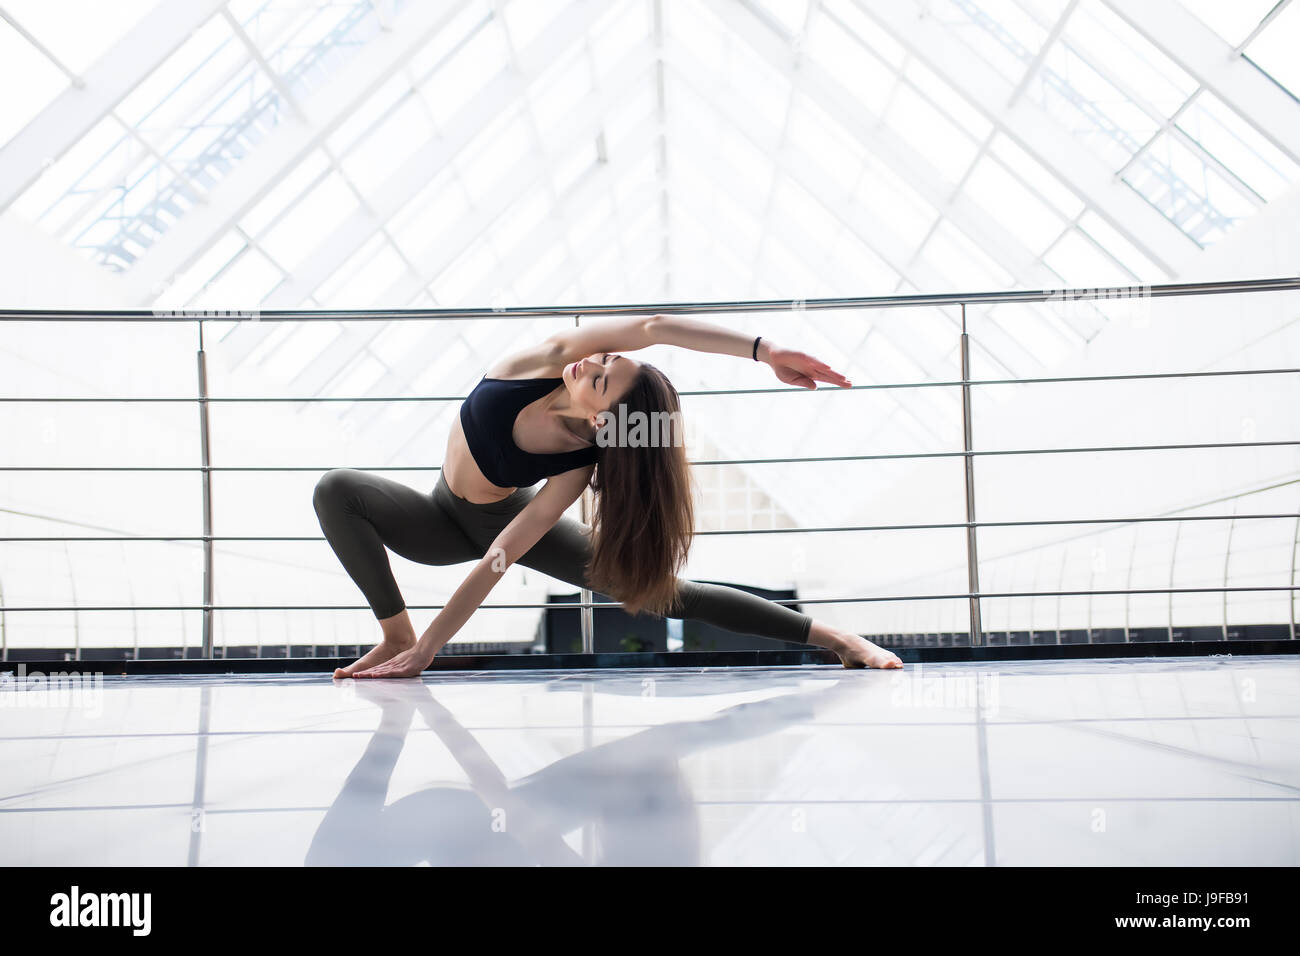 Yoga woman practice in a training hall background. Yoga concept. Stock Photo